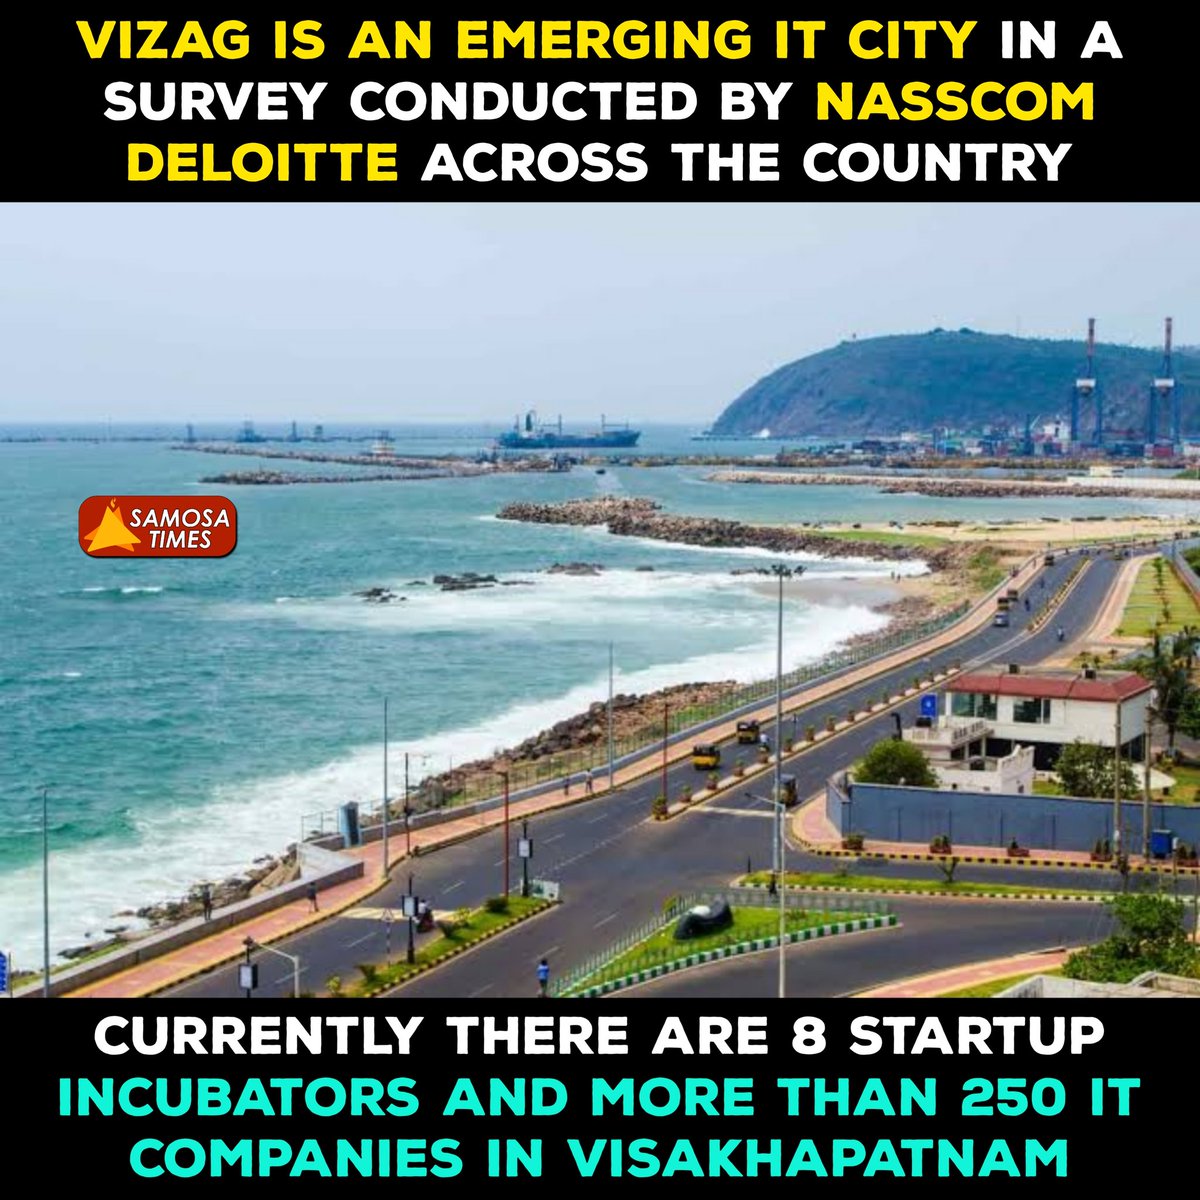 Along with Vizag, 26 cities have been selected, Vijayawada and Tirupati from AP have also got a place in the list 👏👏

#Vizag #ITHub #Vijayawada #Tirupati